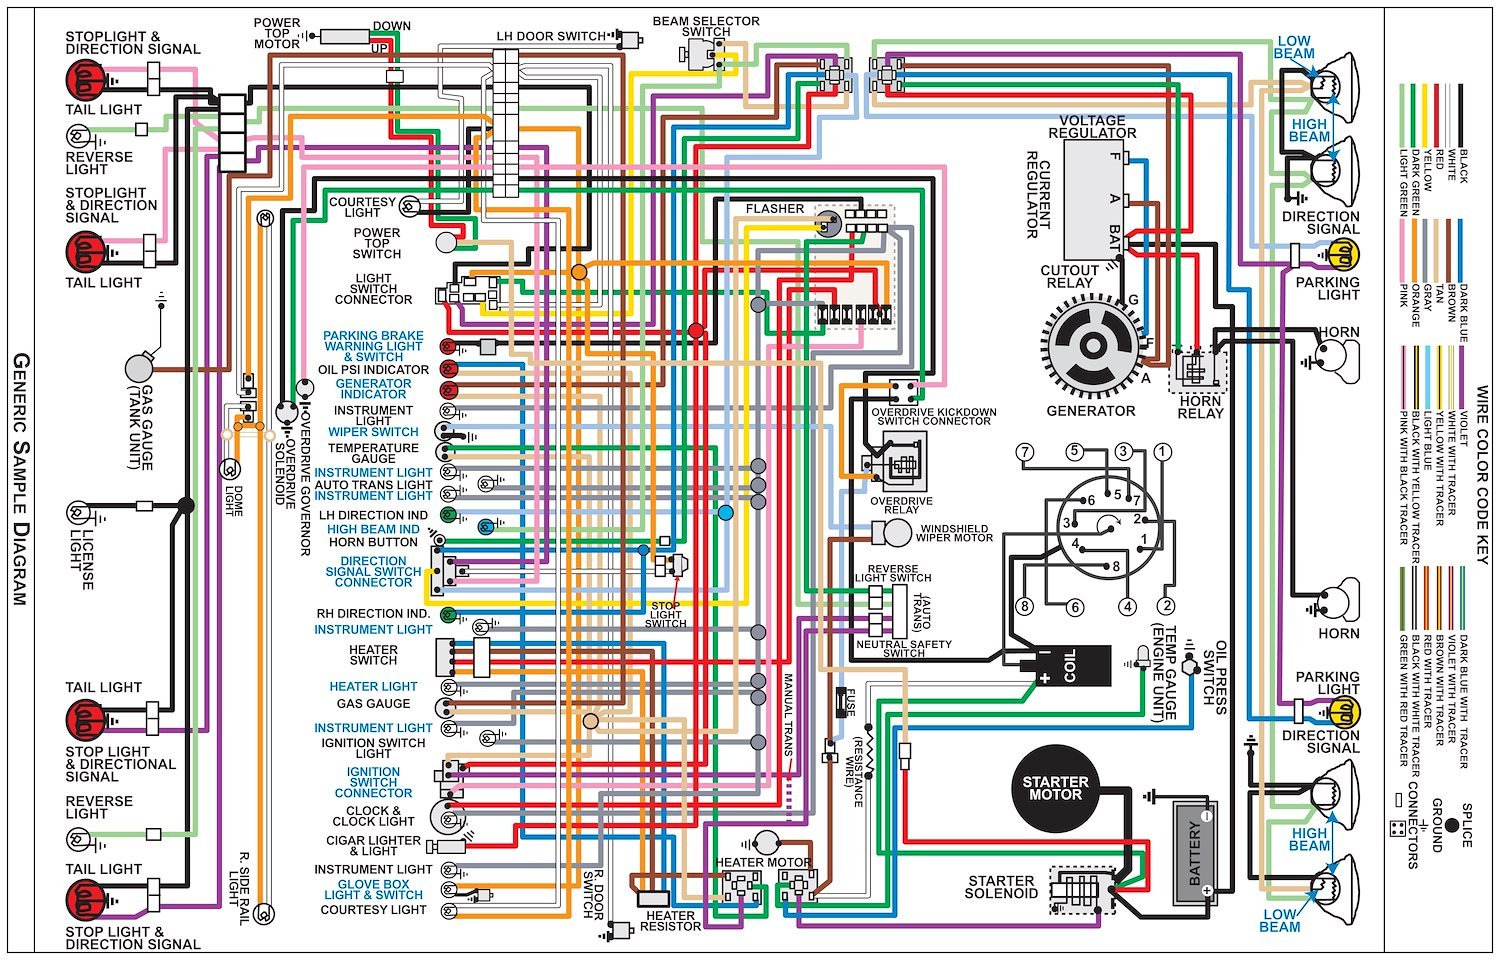 Wiring Diagram for 1972 Plymouth Road Runner, Satellite with Rallye Dash, 11 in x 17 in., Laminated